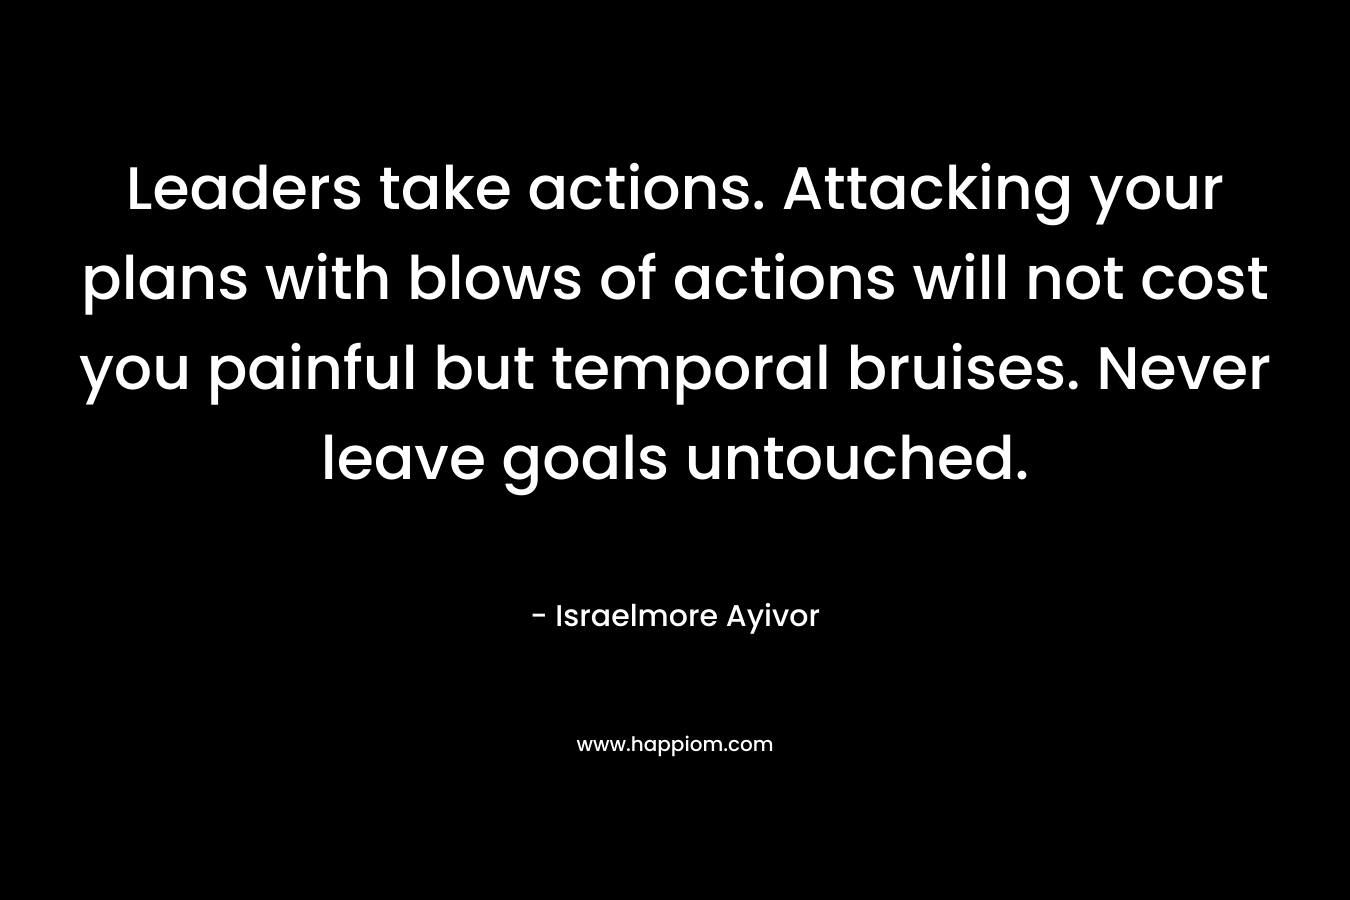 Leaders take actions. Attacking your plans with blows of actions will not cost you painful but temporal bruises. Never leave goals untouched. – Israelmore Ayivor